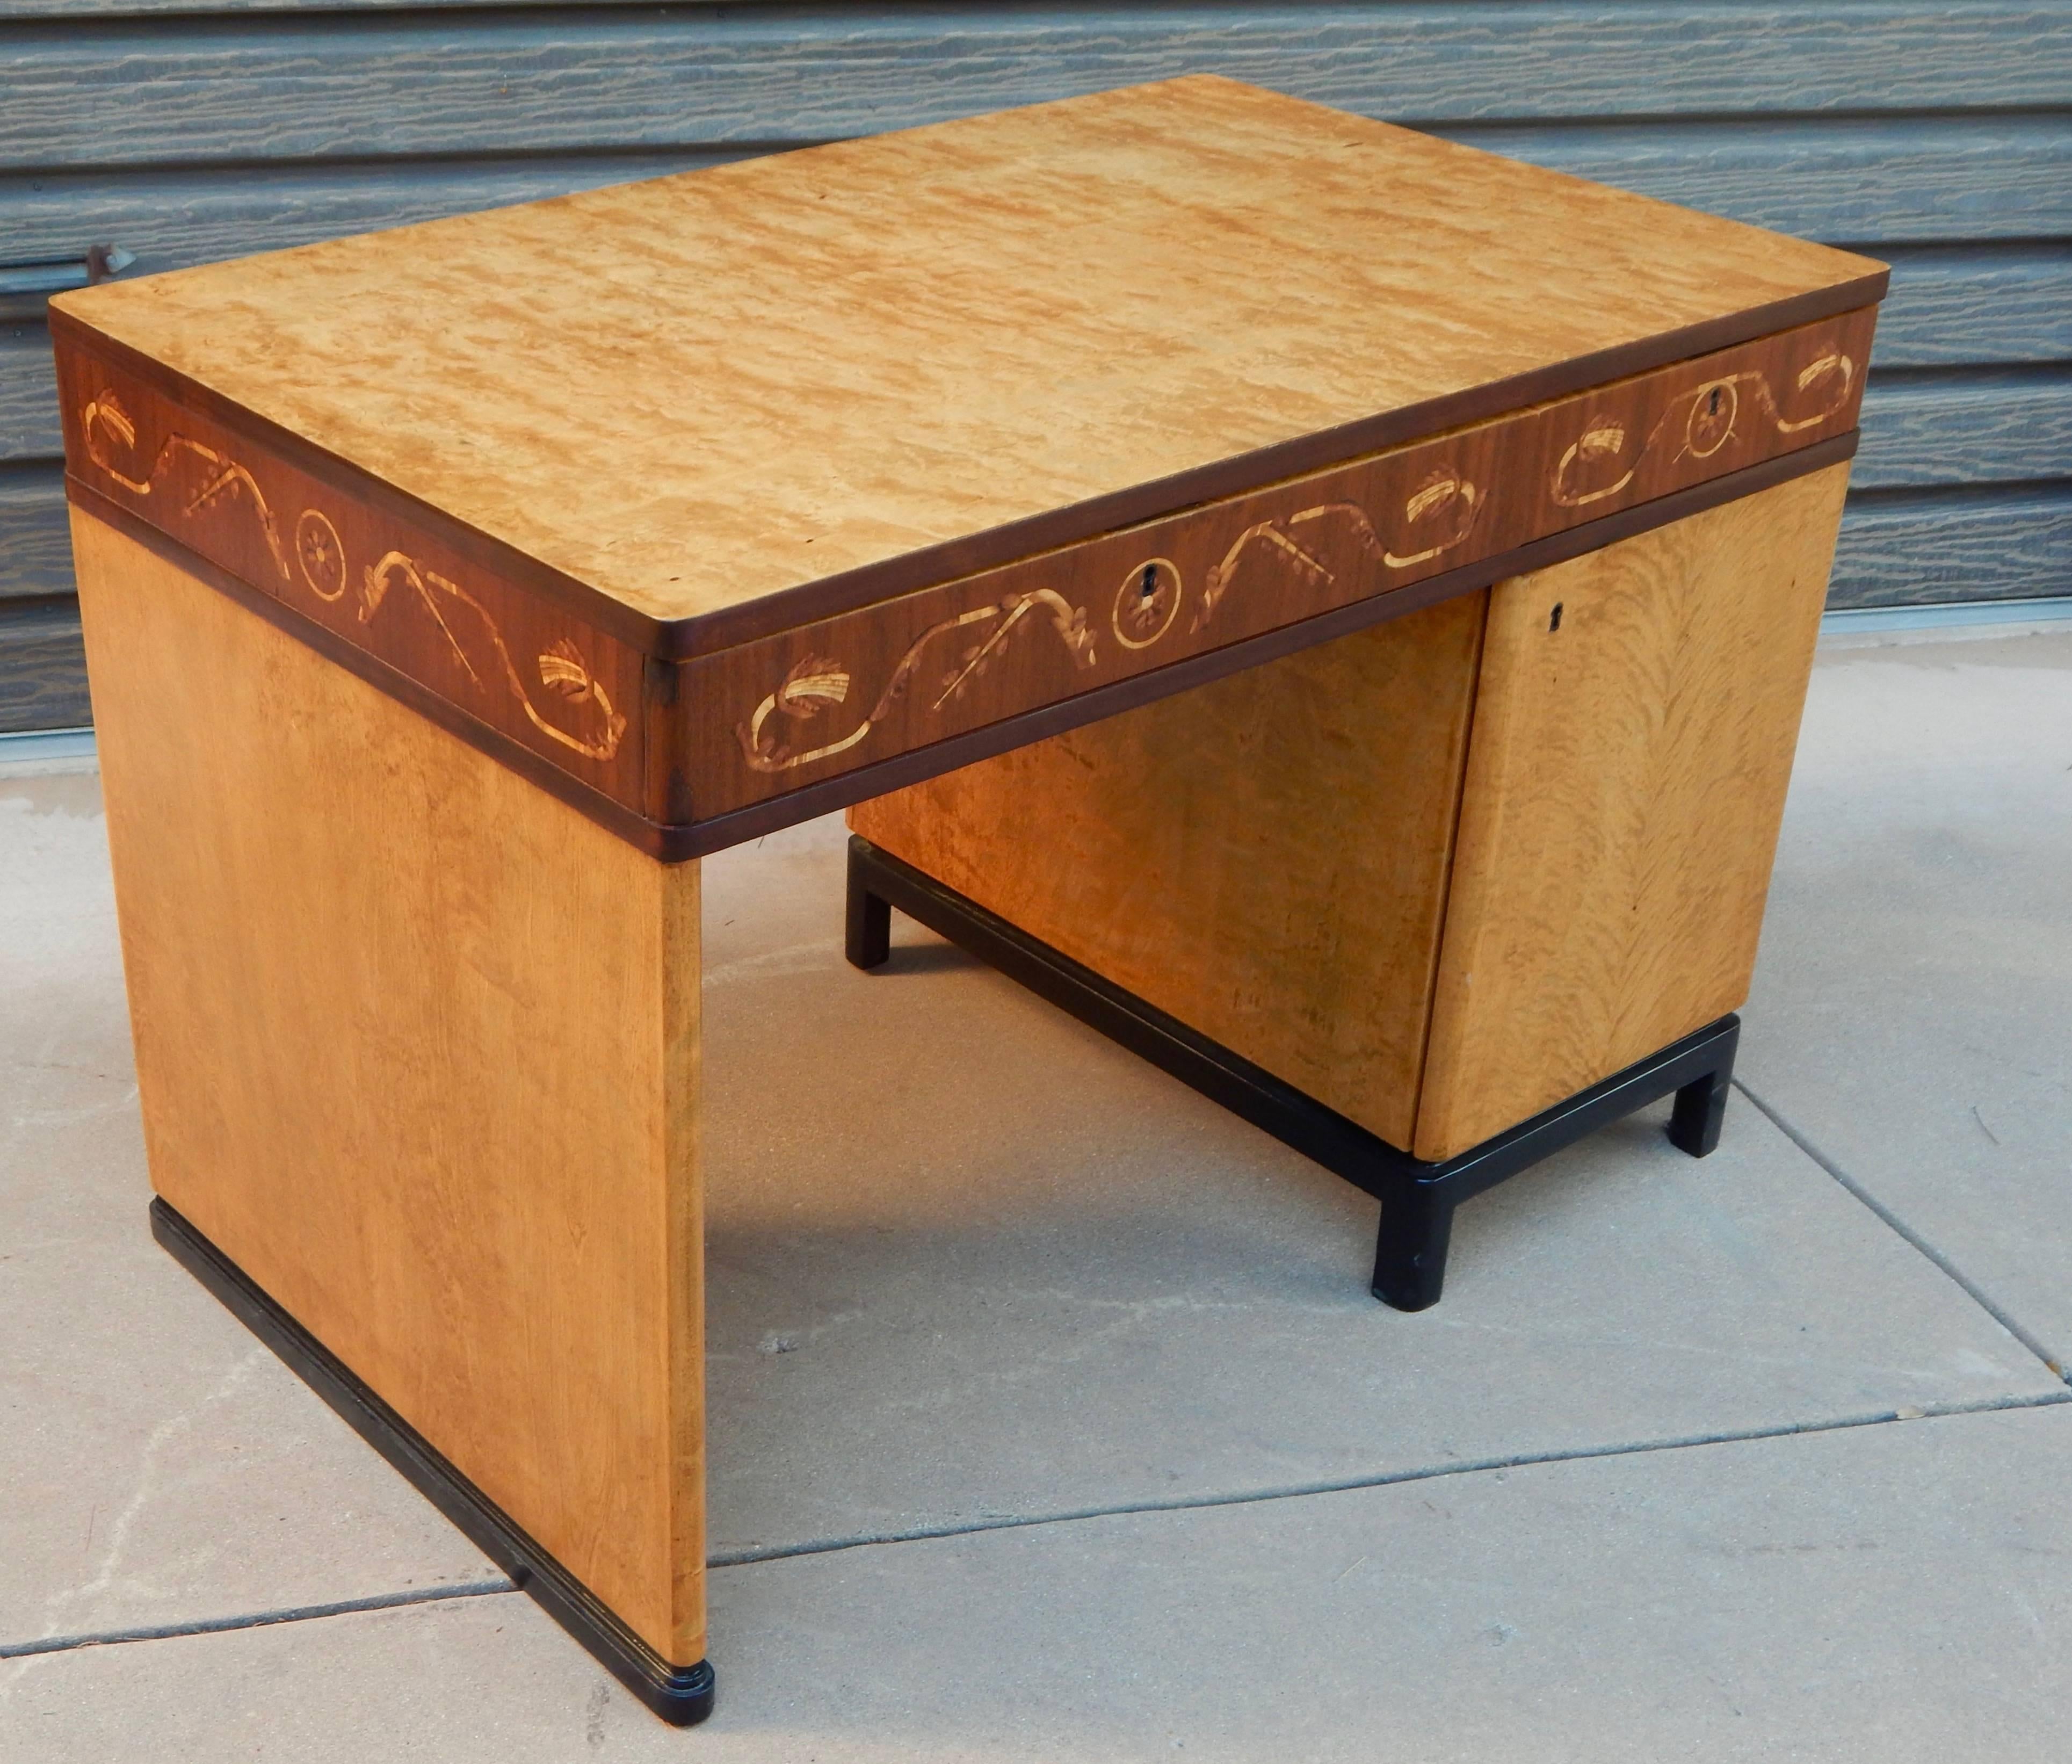 Swedish Art Deco inlaid desk made at Ferdinand Lundquist in Gothenburg, Sweden in the 1930s. Rendered in highly figured golden flame birchwood. Inlaid neoclassically inspired banding rendered in rosewood, Carpathian elm and birchwood. Ebonized birch